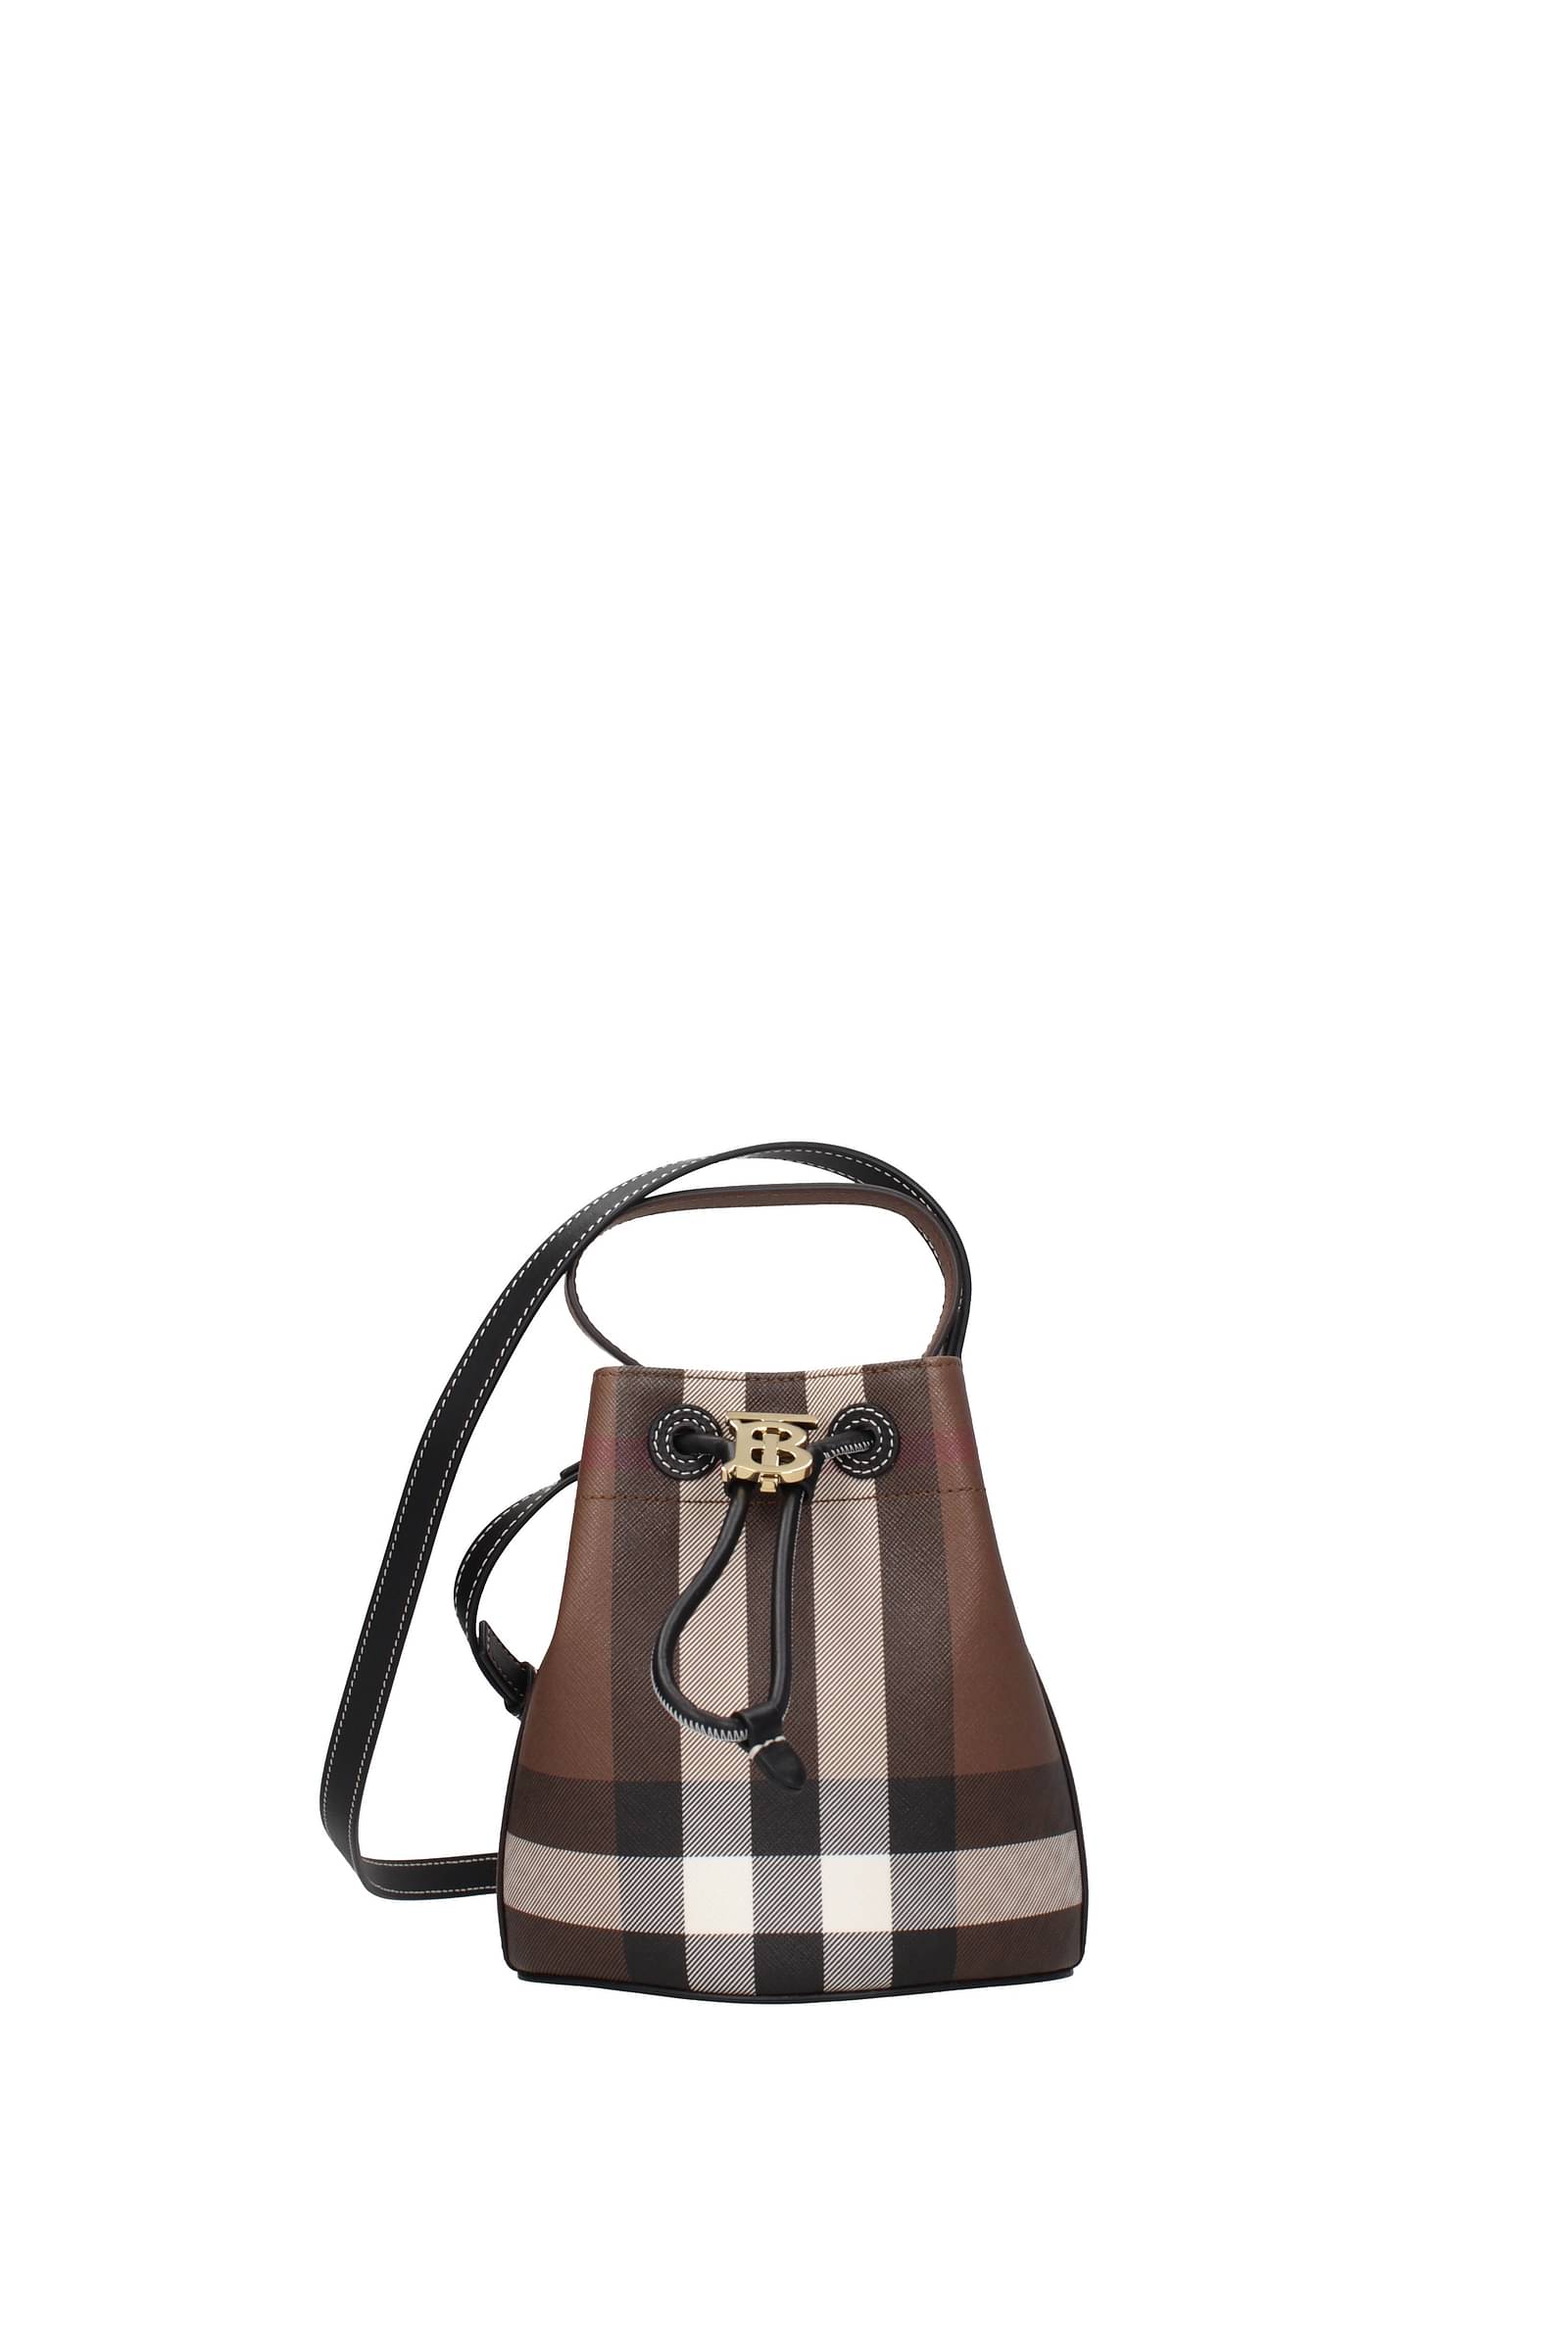 Burberry India  Shop Authentic Handbags  Collections Up To 60 Off